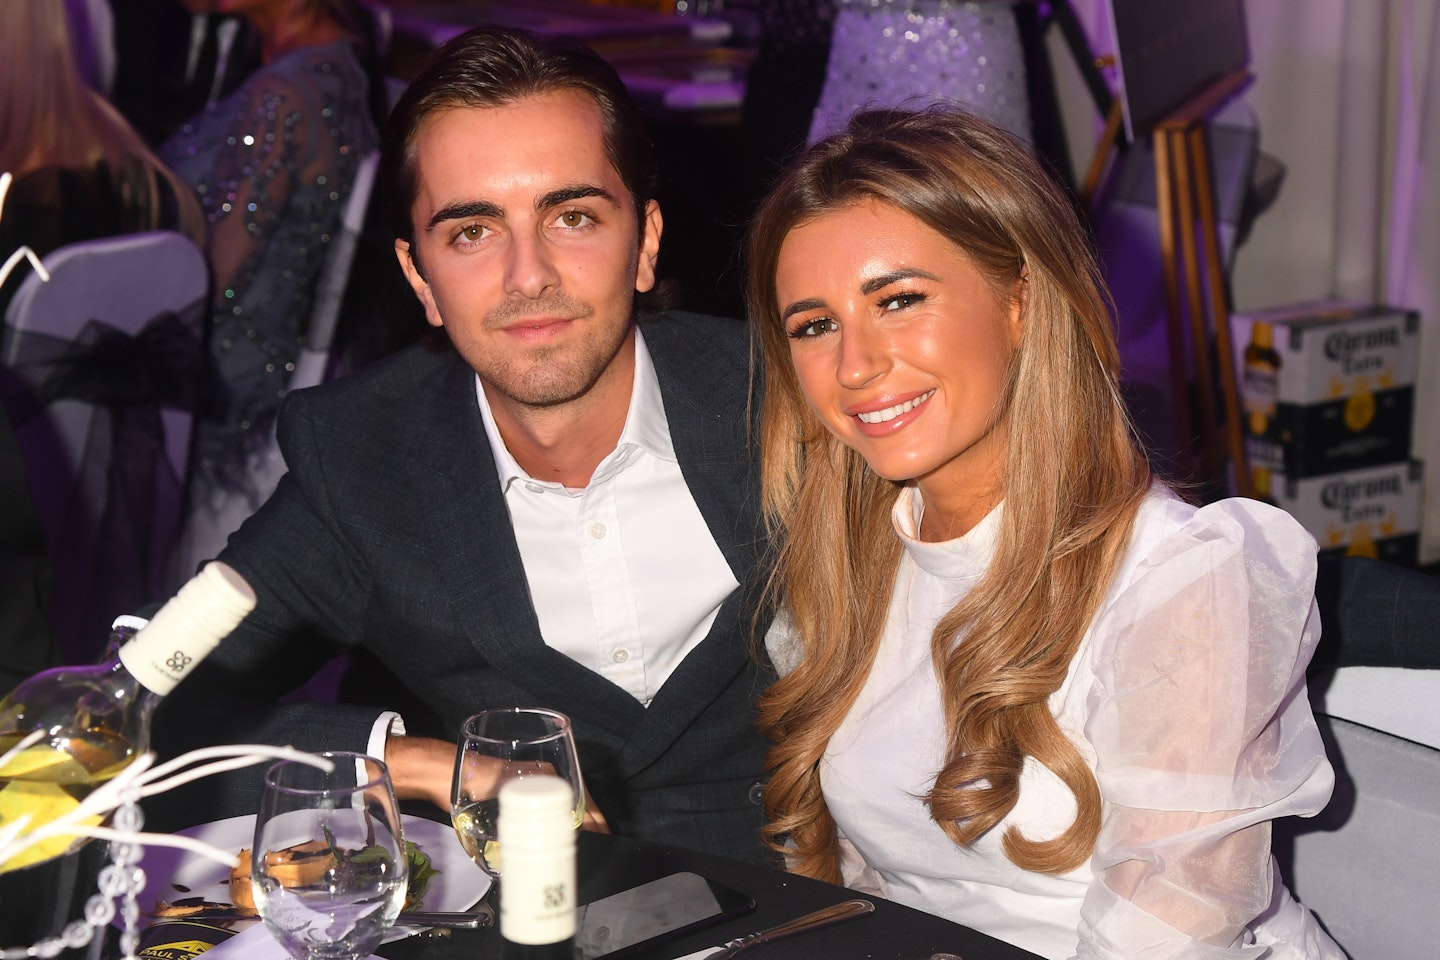 Sammy Kimmence and Dani Dyer in September 21, 2019 in London (Photo by Dave J Hogan/Getty Images)